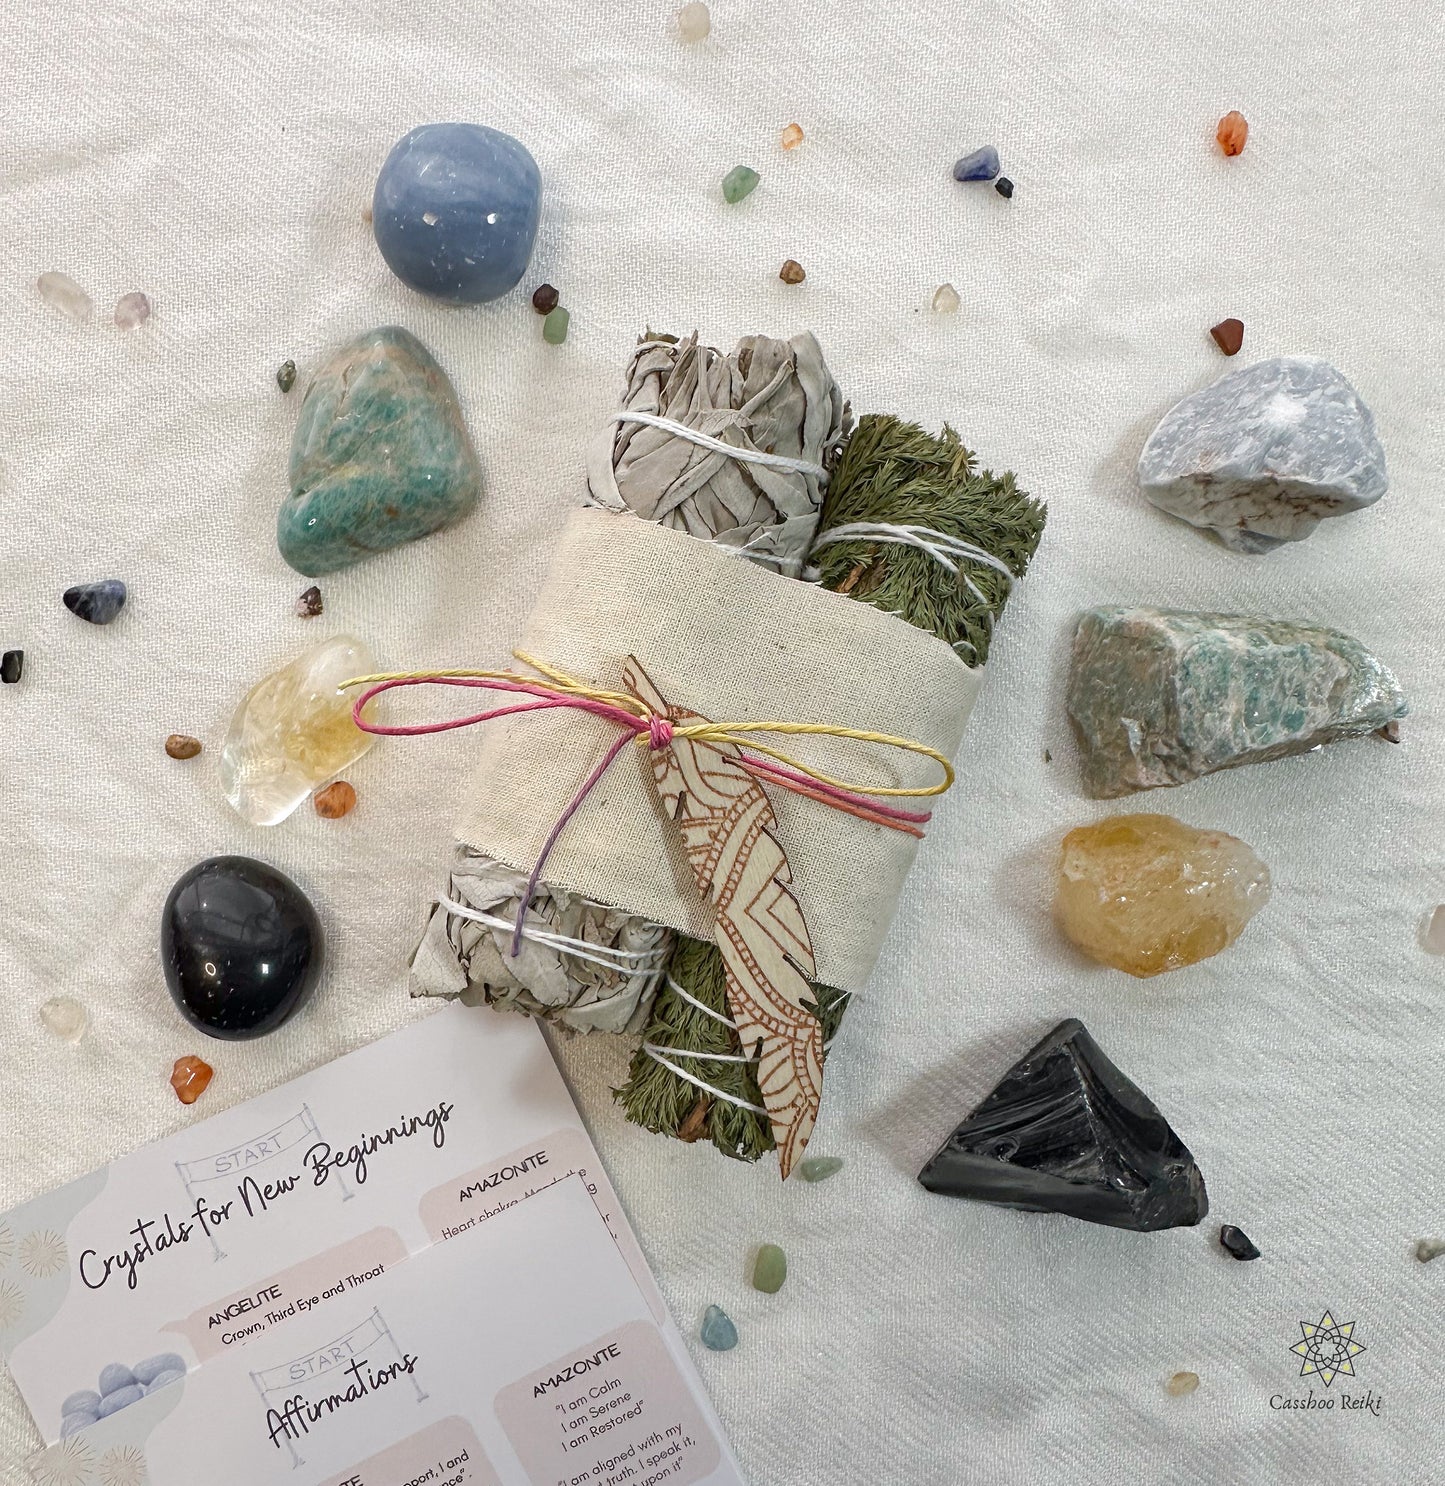 Crystal Set for New Beginnings | Crystals for Fresh Start | New Year Gift Sets